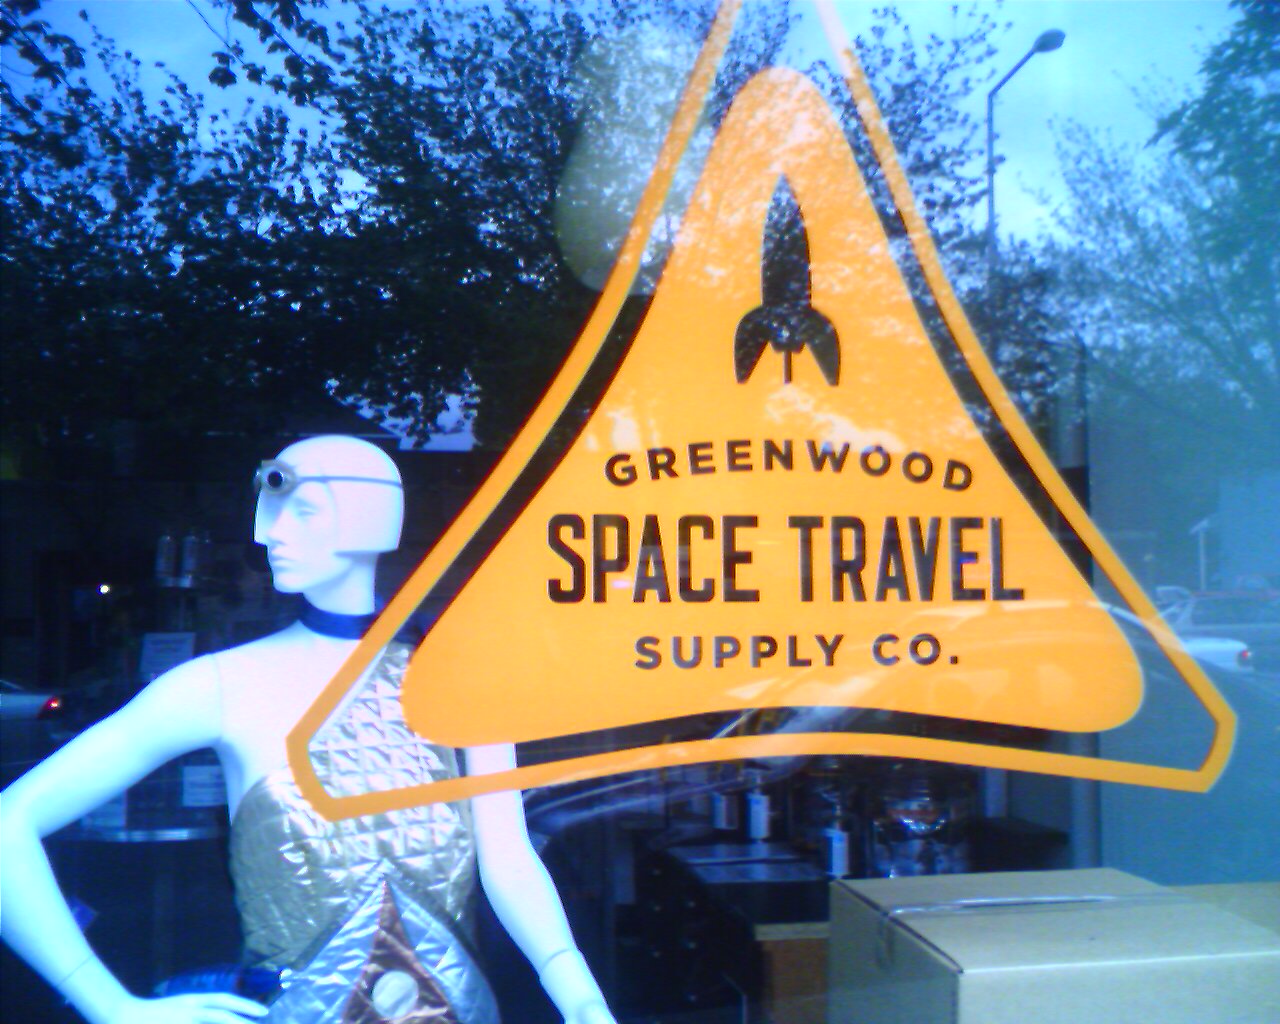 Greenwood Space Travel Supply Company.